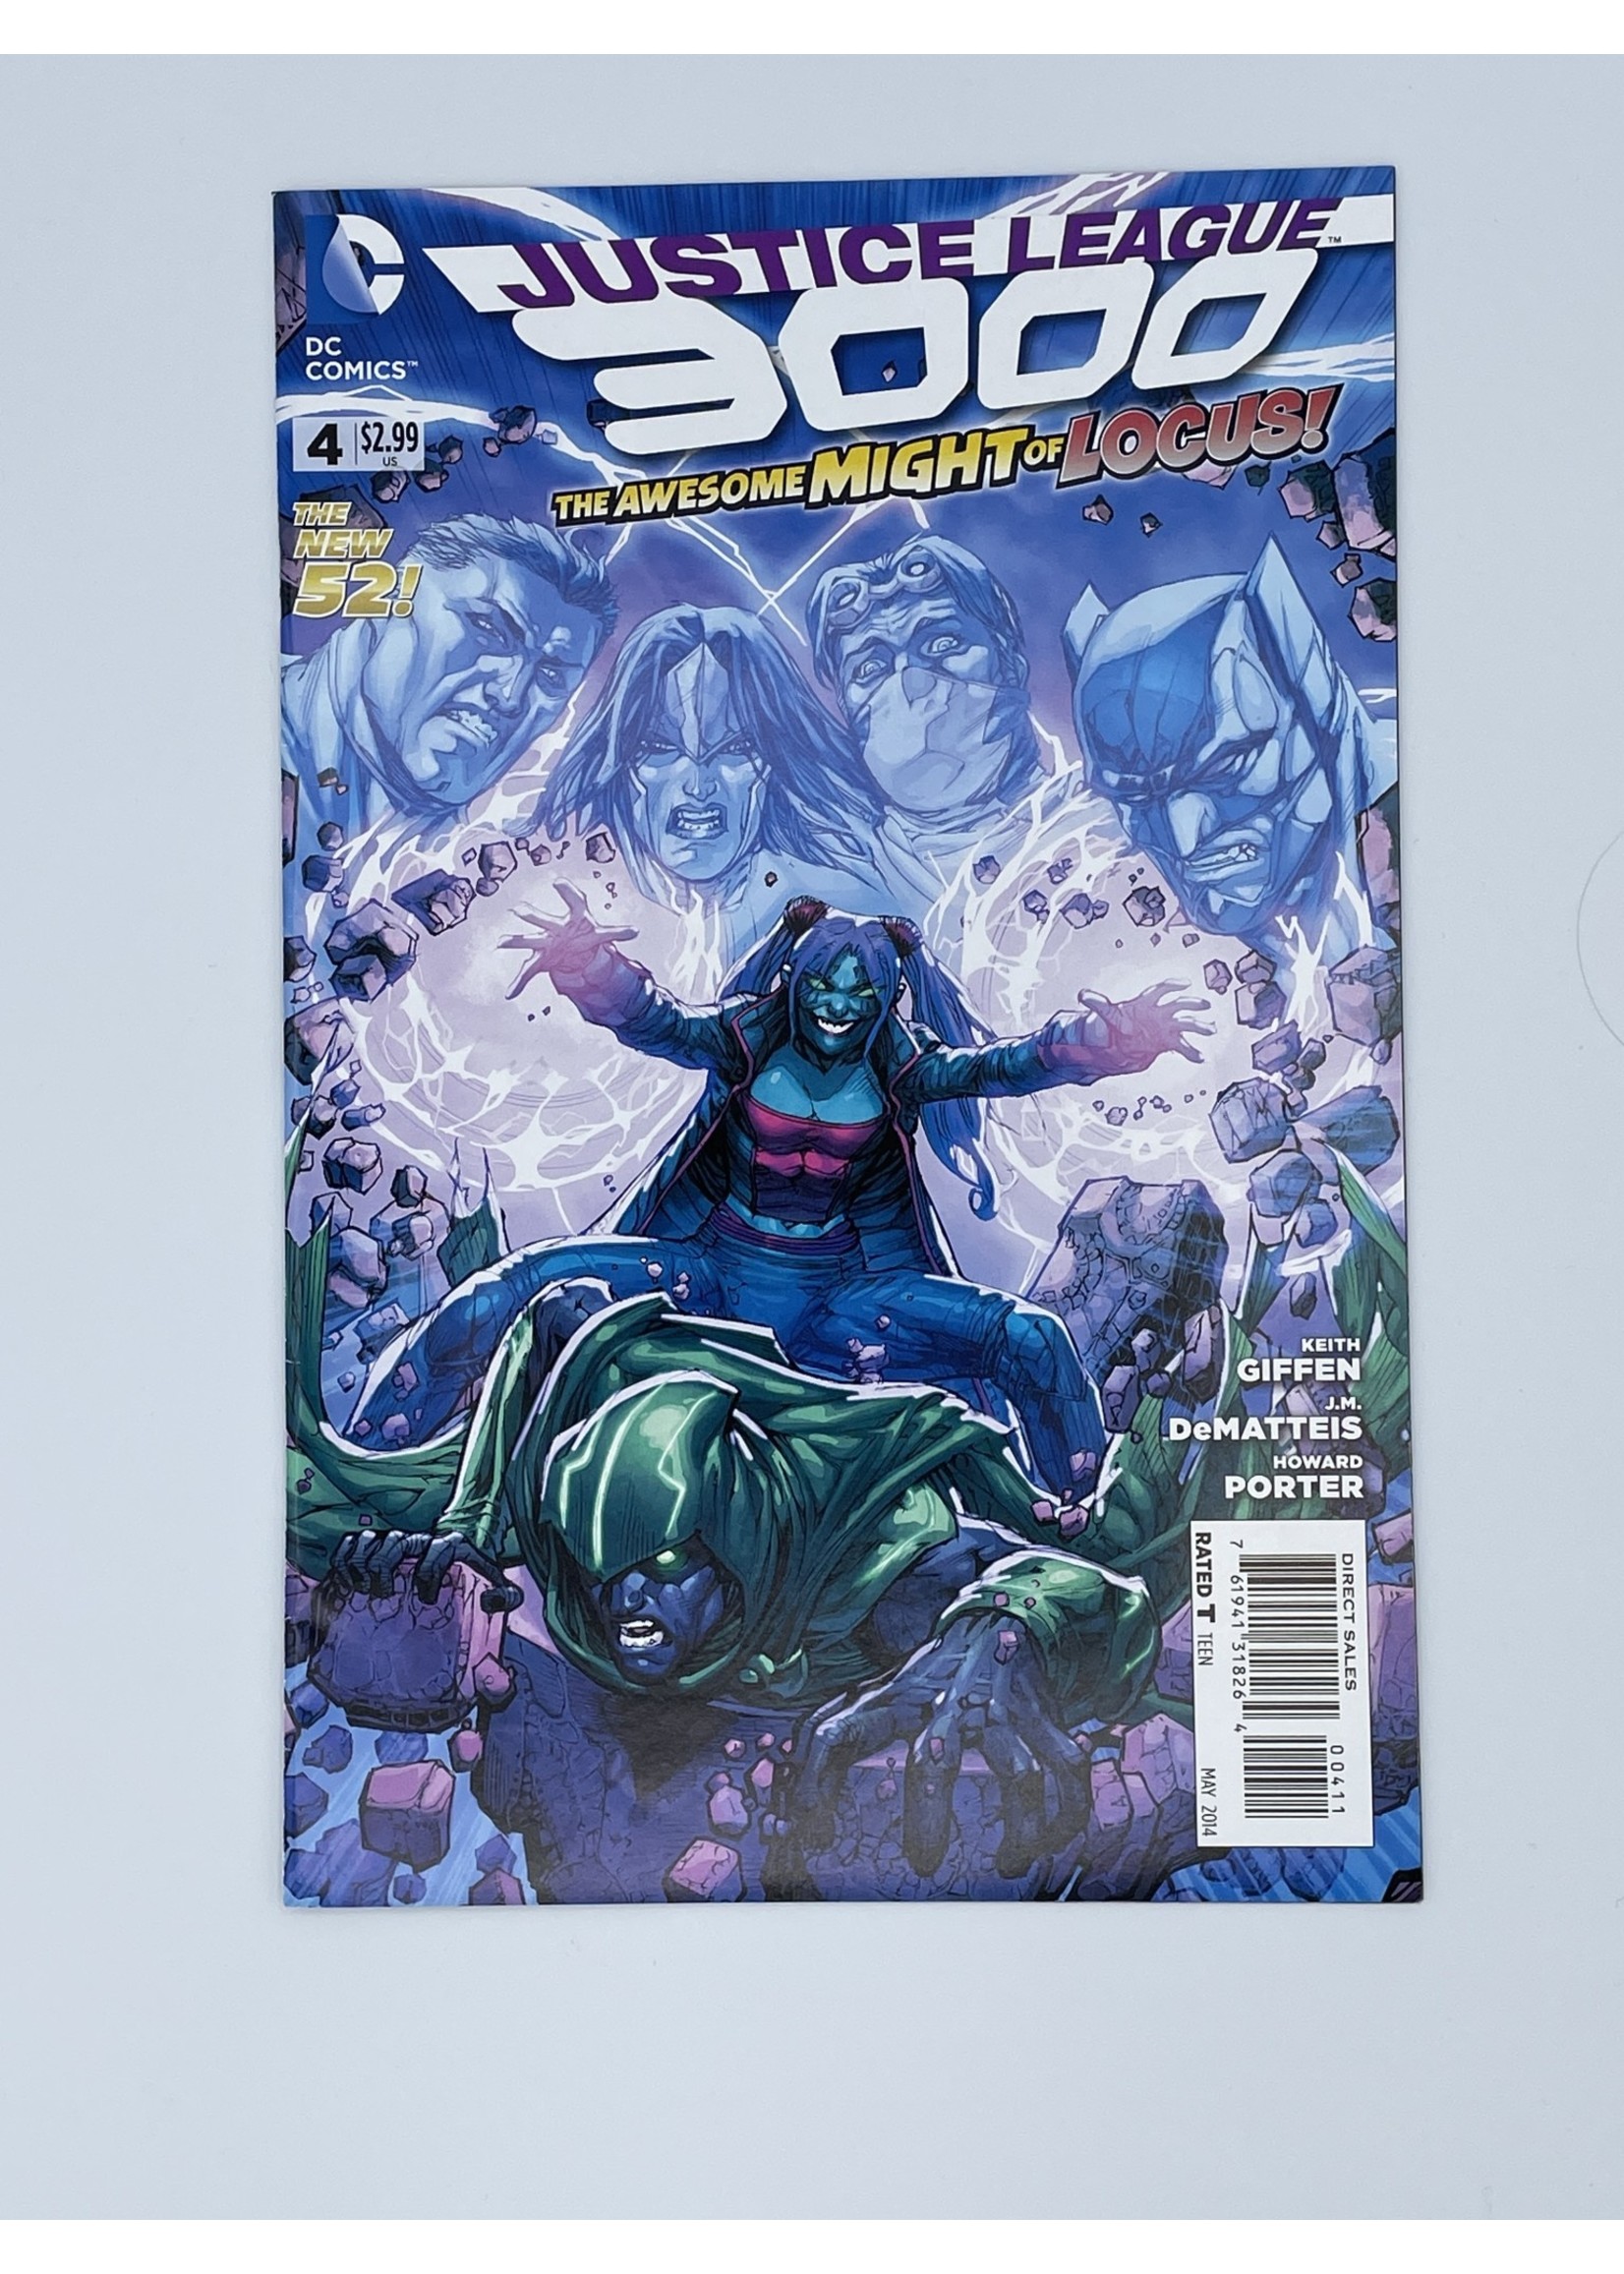 DC Justice League 3000 #4 Dc May 2014